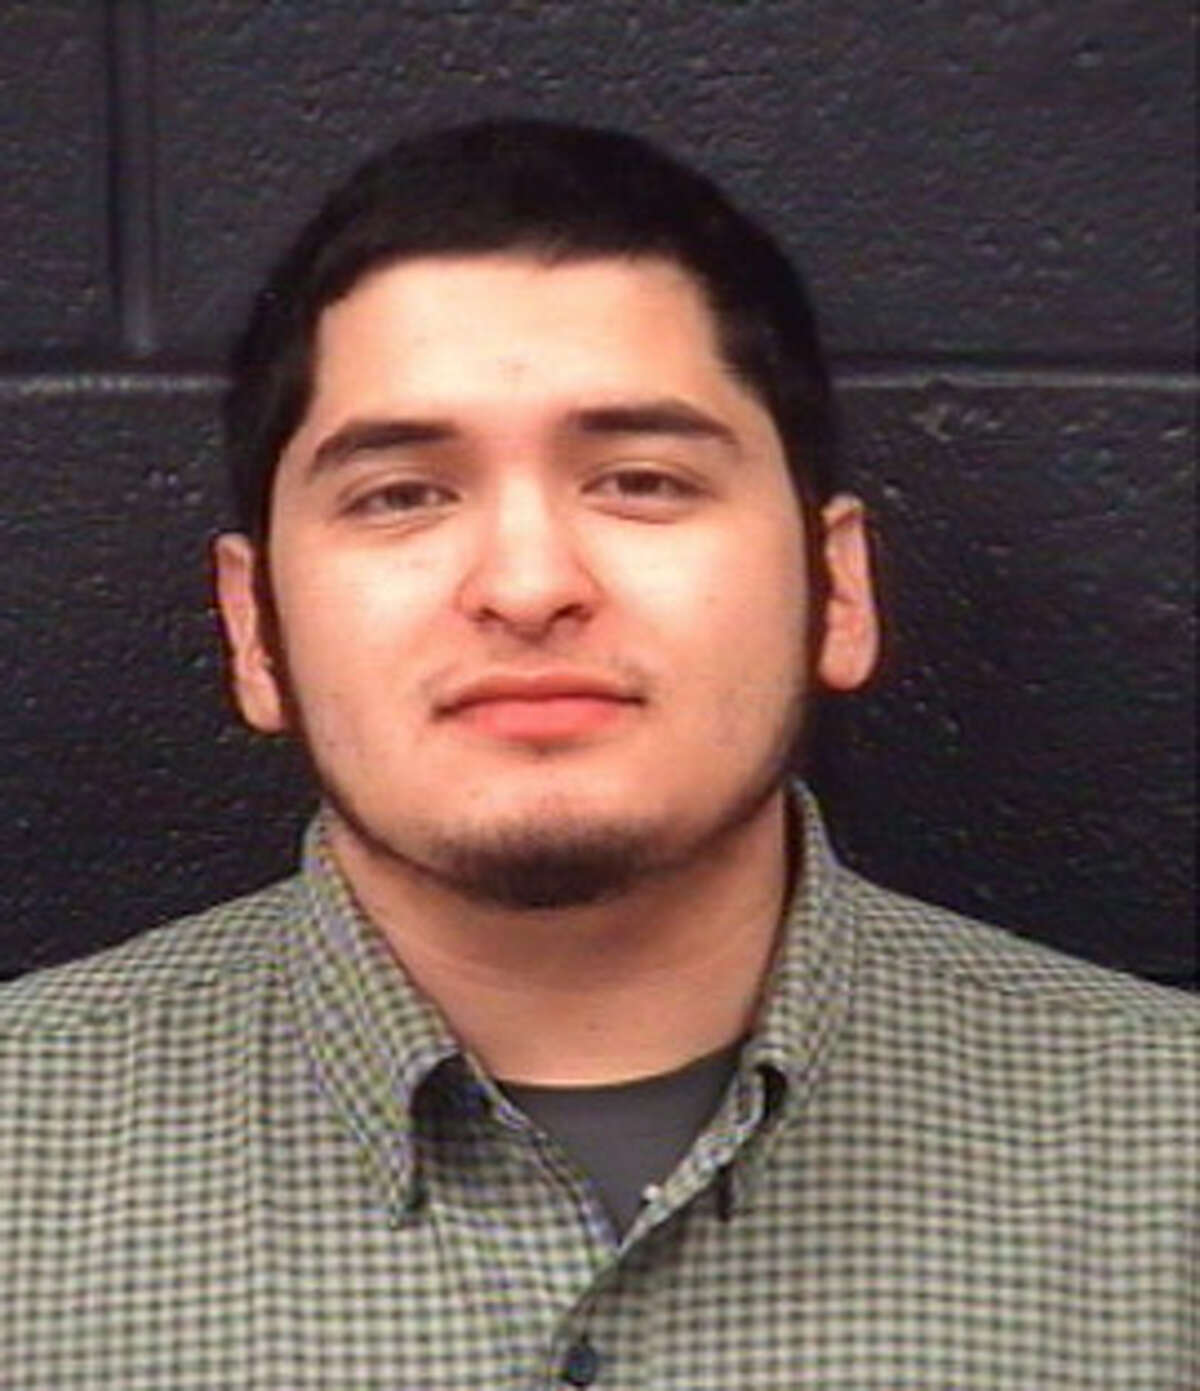 Antonio Santos III Arce was charged with driving while intoxicated